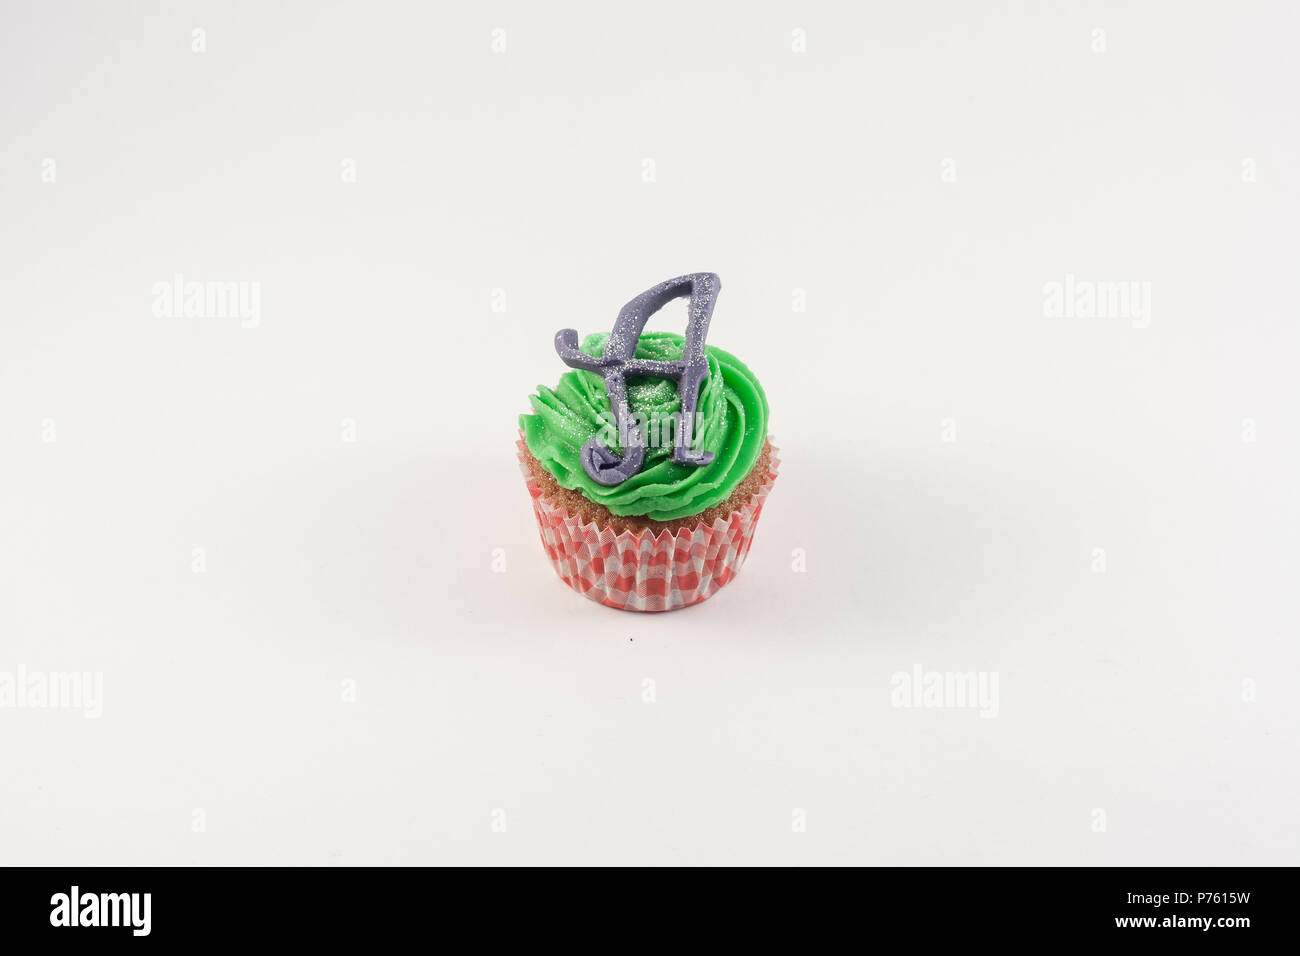 A Cupcake decorated with alice in wonderland Stock Photo